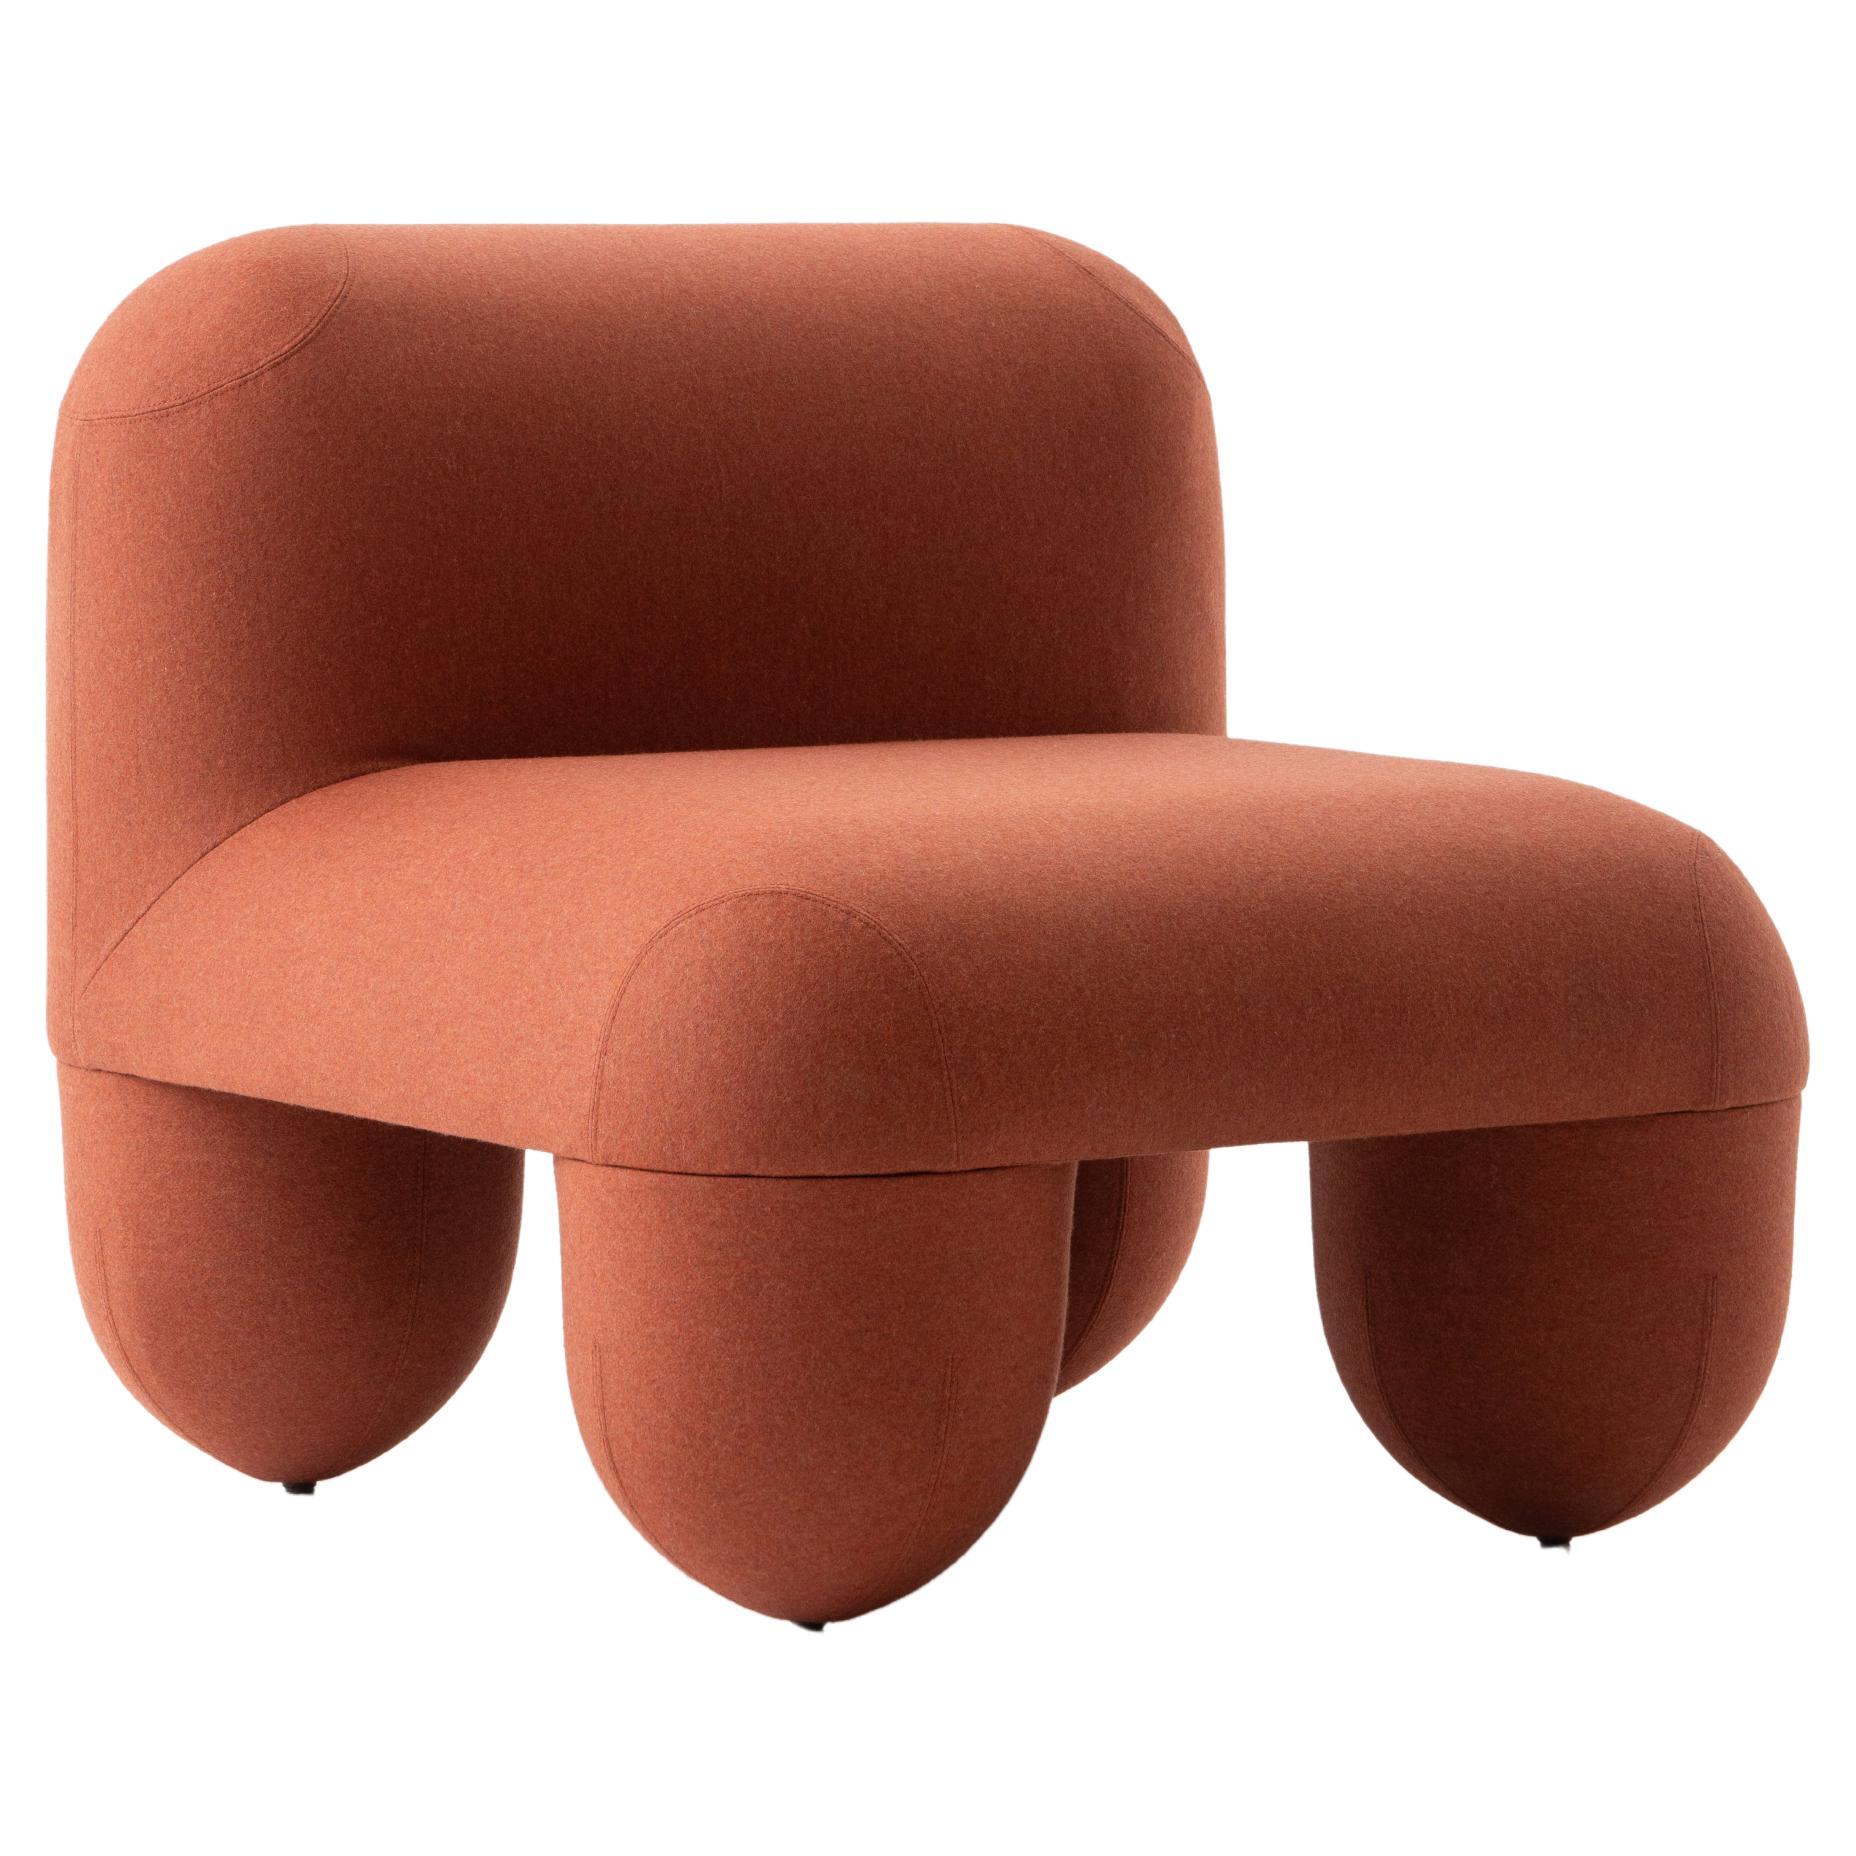 Contemporary Low Chair 'Hello' by Denys Sokolov x Noom, Orange For Sale